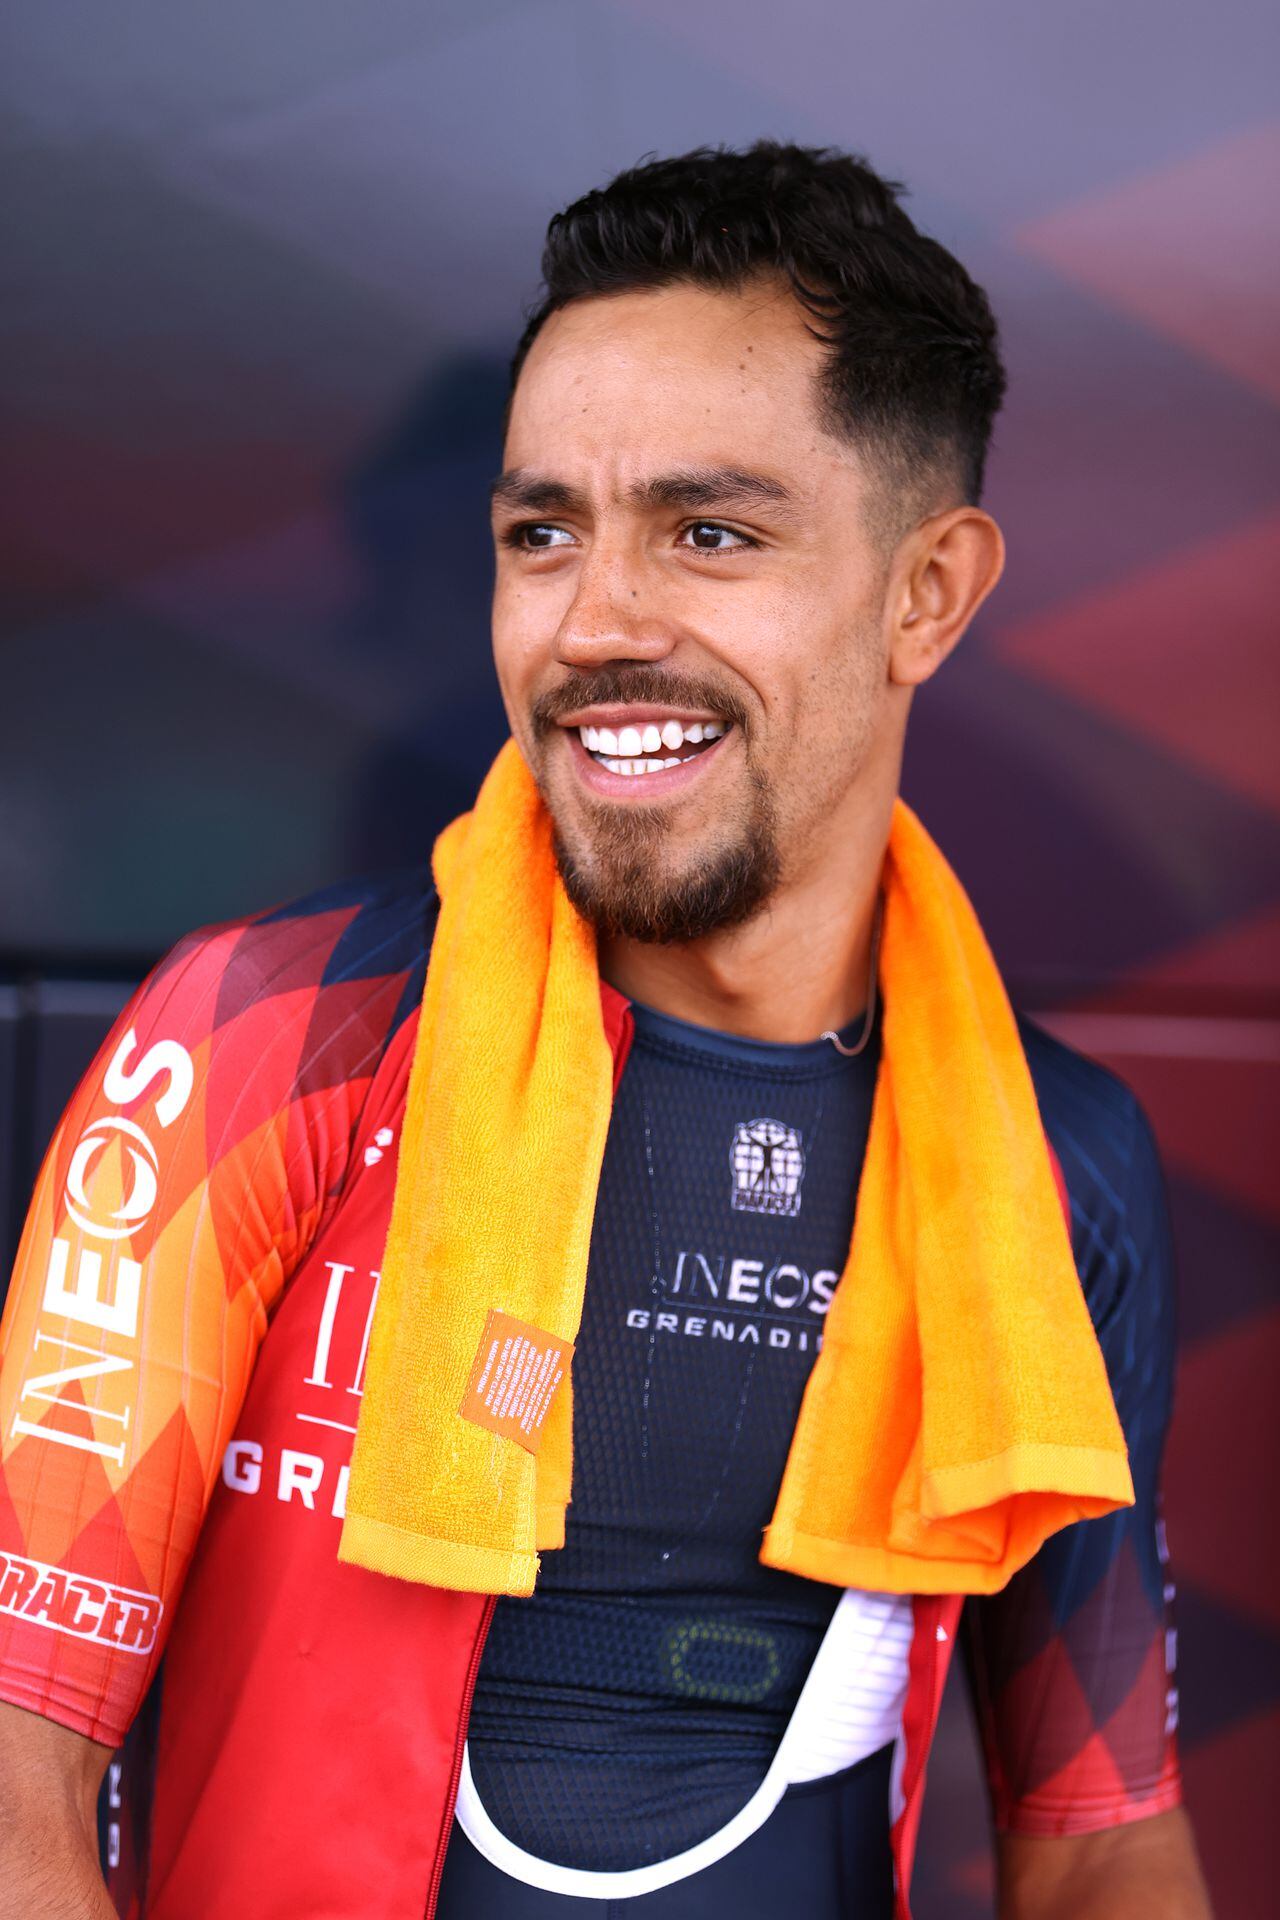 BILBAO, SPAIN - JUNE 30: Daniel Martinez of Colombia and Team INEOS Grenadiers during the Team INEOS Grenadiers training ahead of the 110th Tour de France 2023 on June 30, 2023 in Bilbao, Spain. (Photo by Michael Steele/Getty Images)